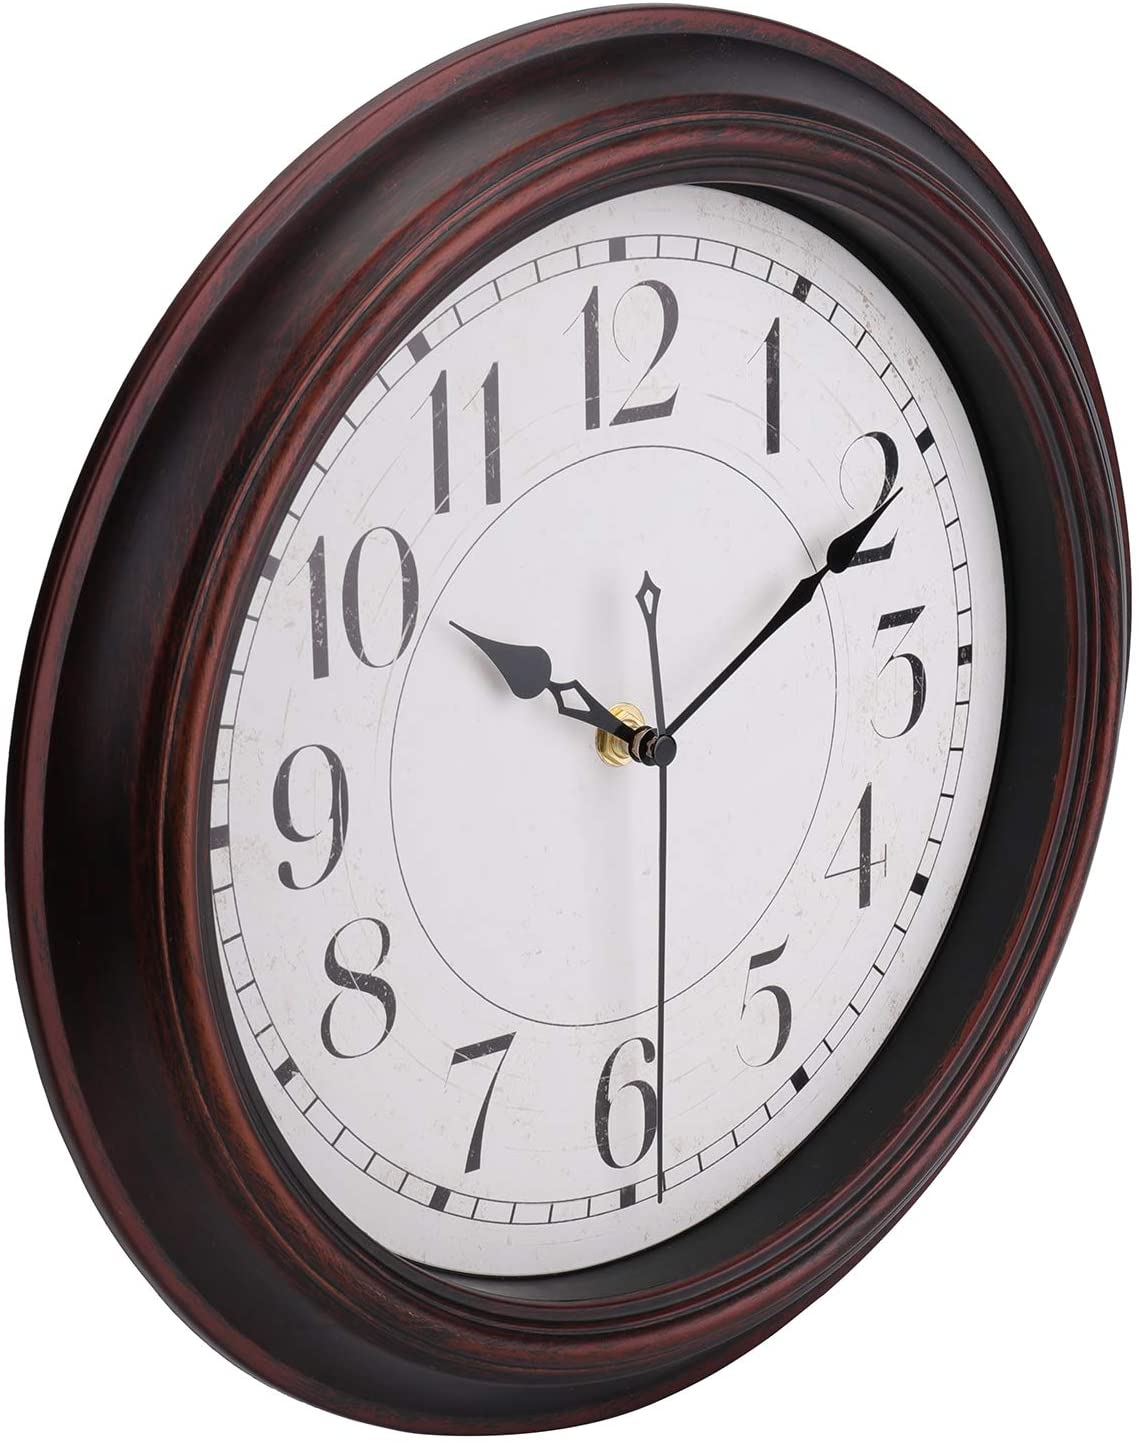 8015-12IN-Bronze 12 Inch Antique Beige White Rustic Wall Clock Vintage Decorative Wall Clock Silent Non-Ticking Battery Operated Quartz Classic Retro Round Wall Clock for Kitchen Living Room Office